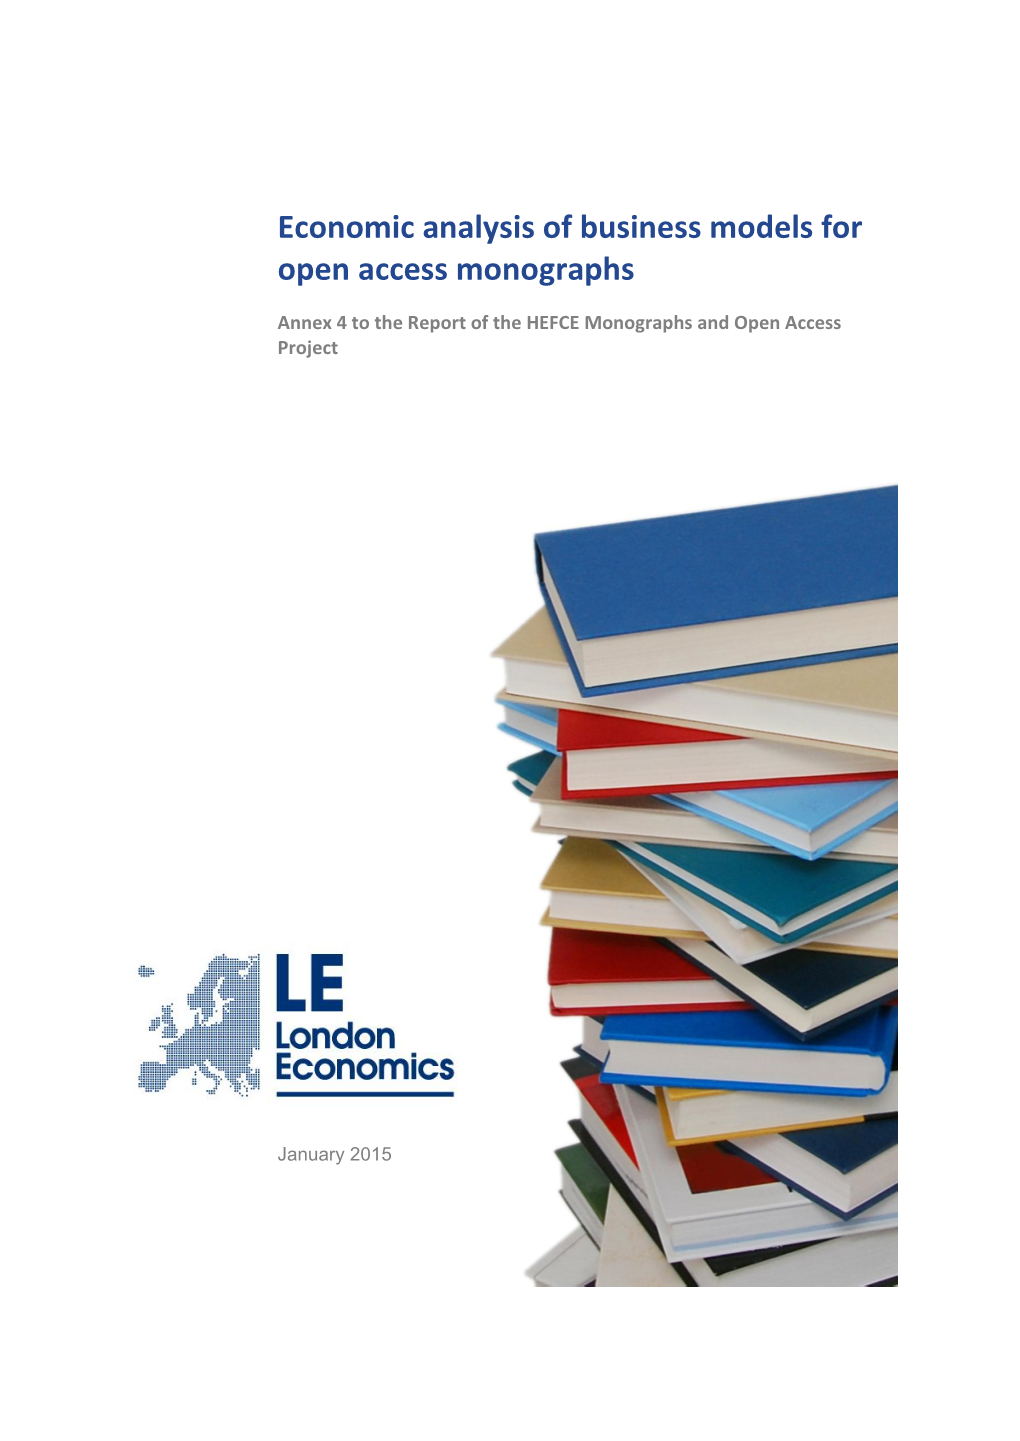 Economic Analysis of Business Models for Open Access Monographs